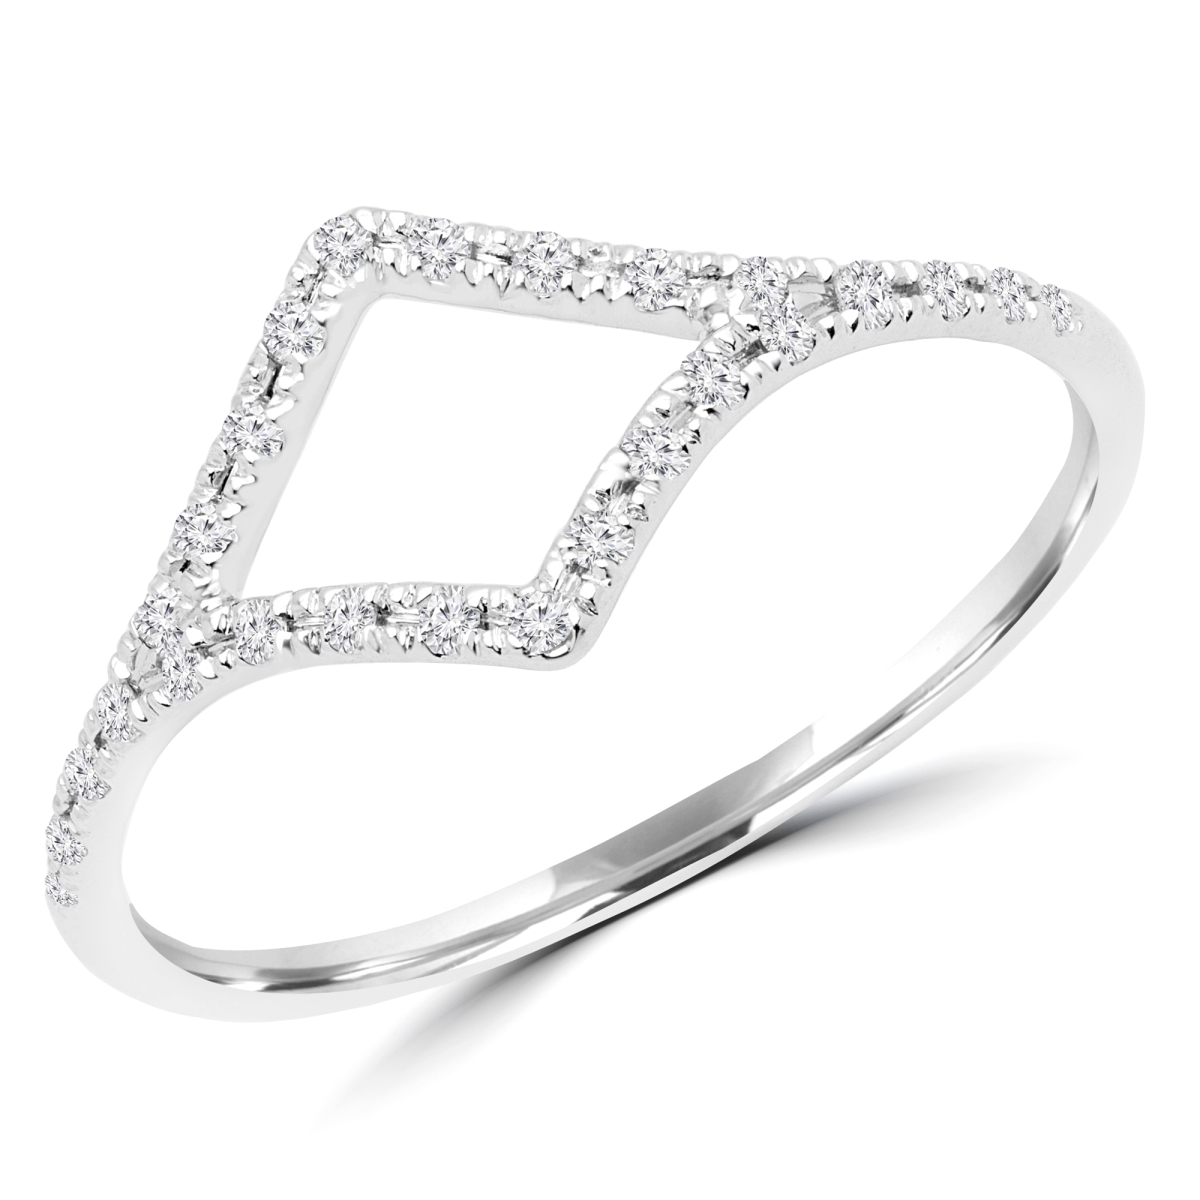 Picture of Majesty Diamonds MDR170053-P 0.1 CTW Round Diamond Cocktail Ring in 14K White Gold